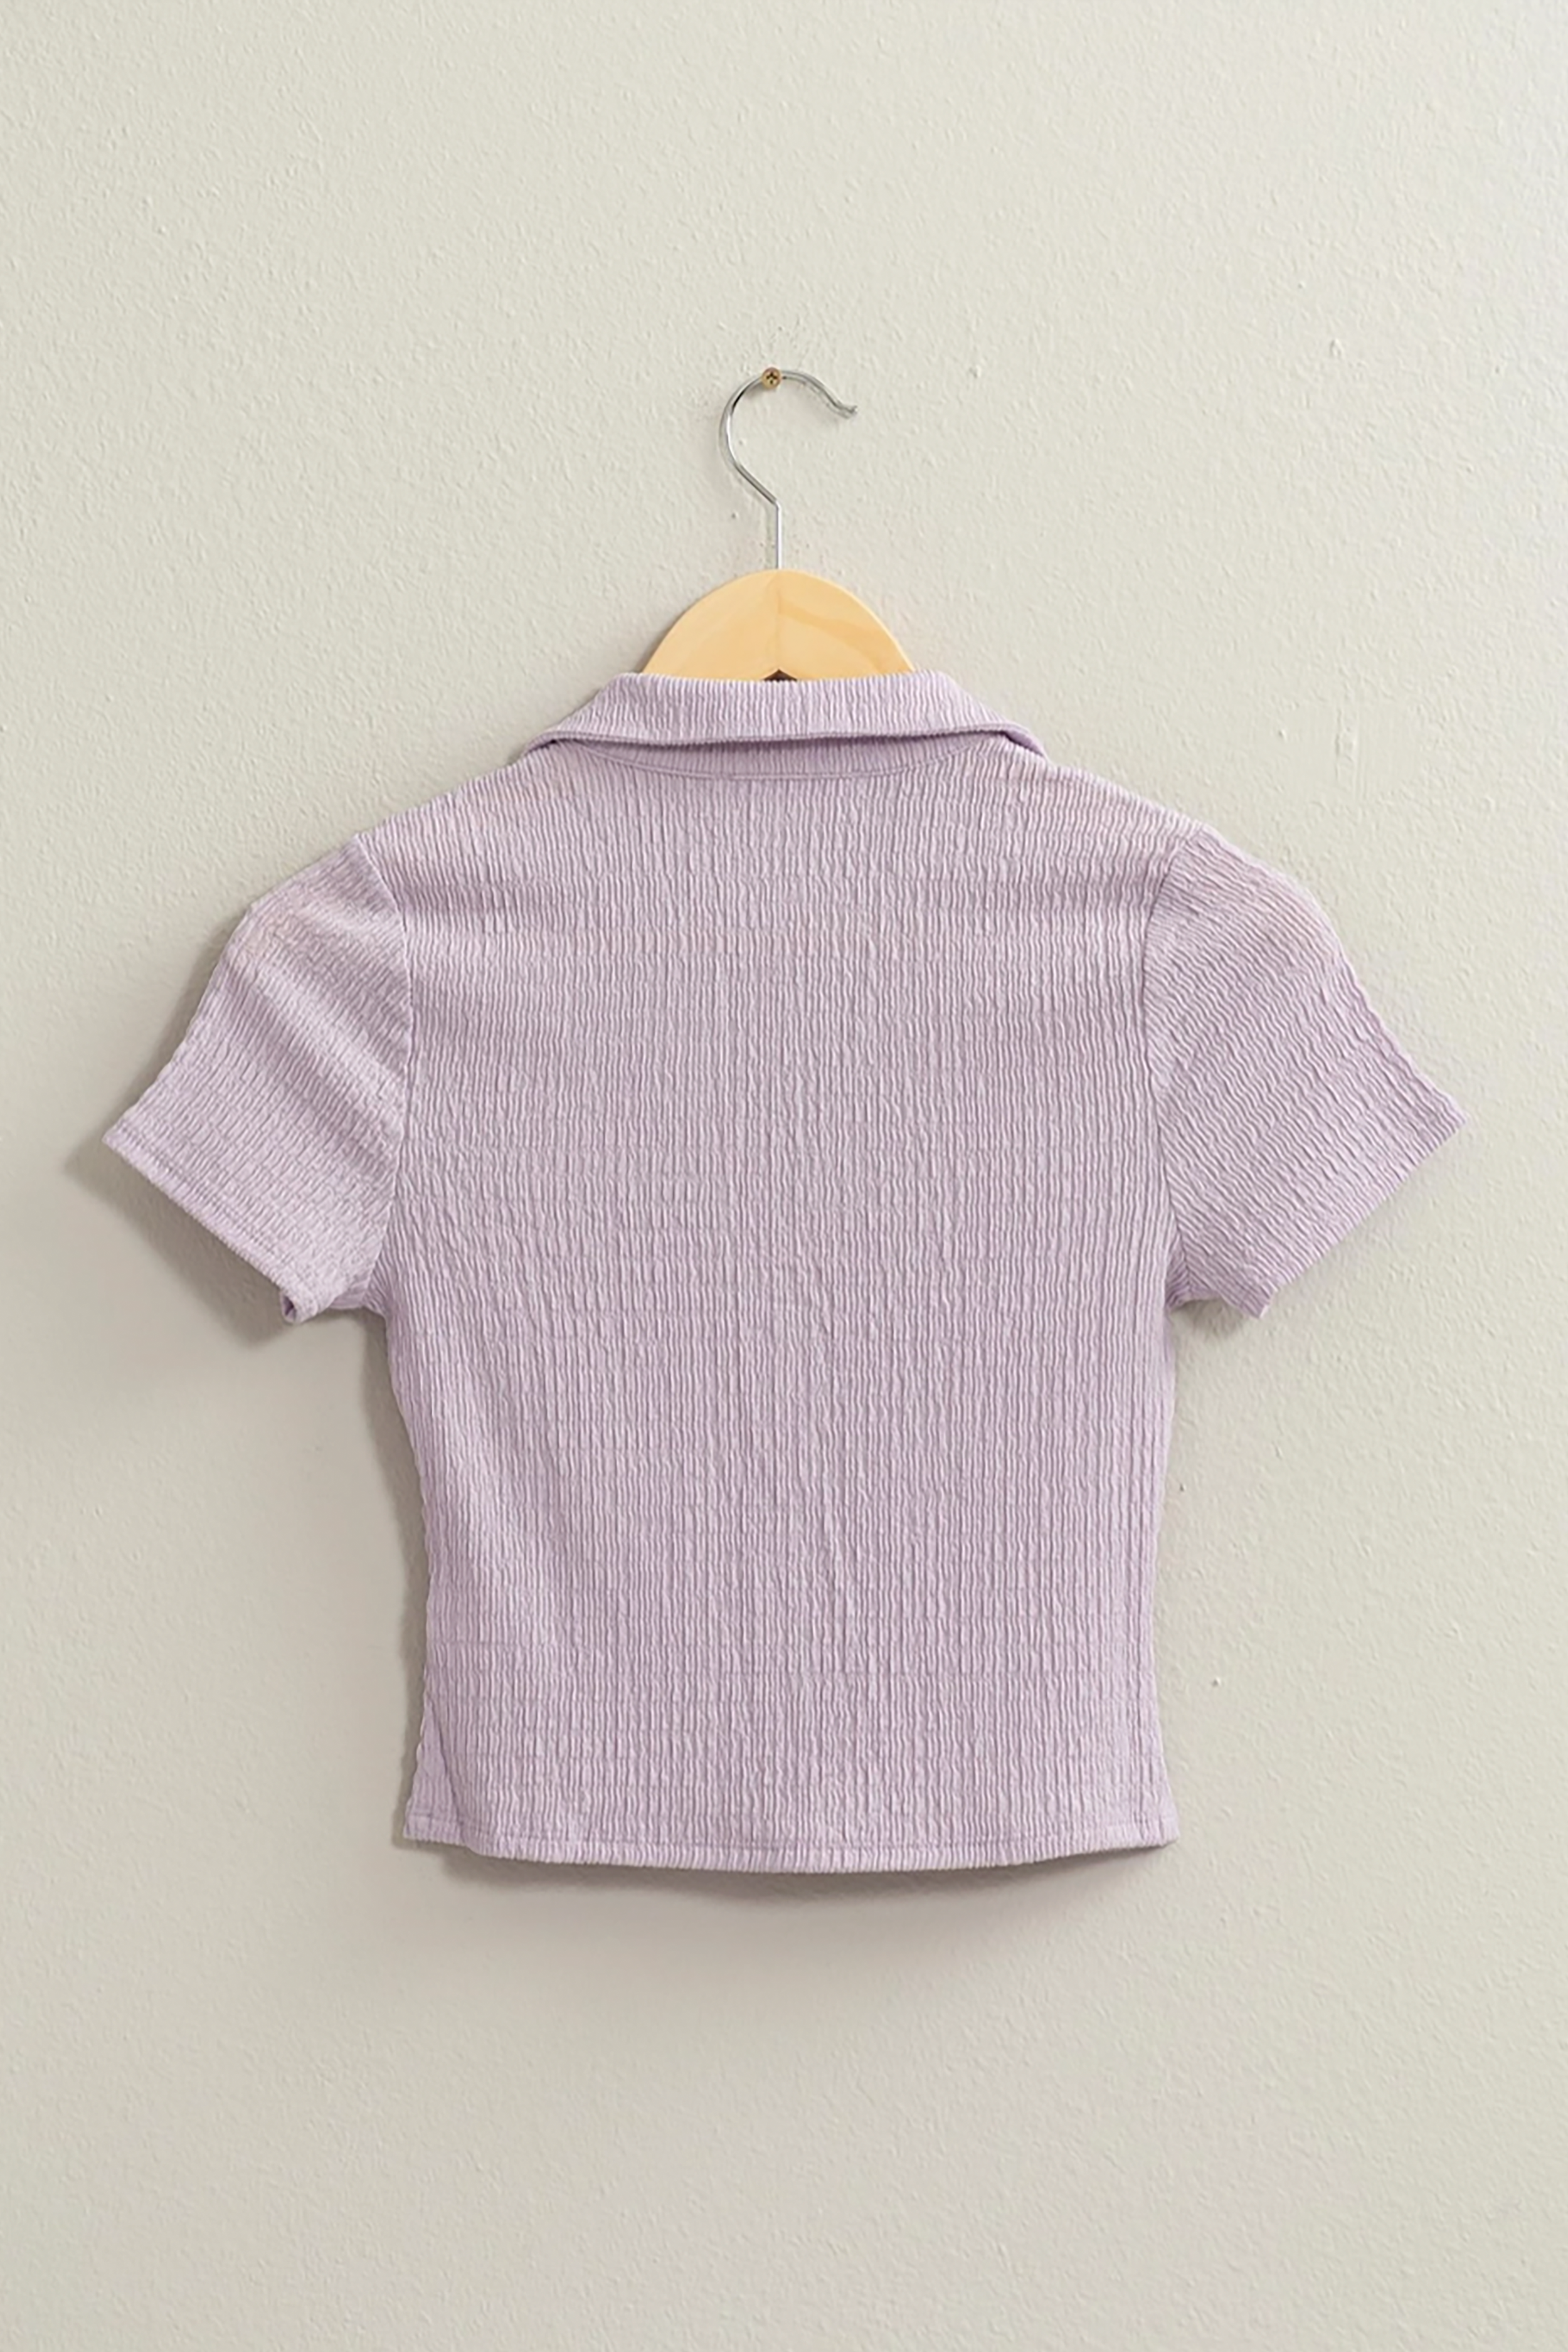 Crinkle Knit Button Front Top in Lavender